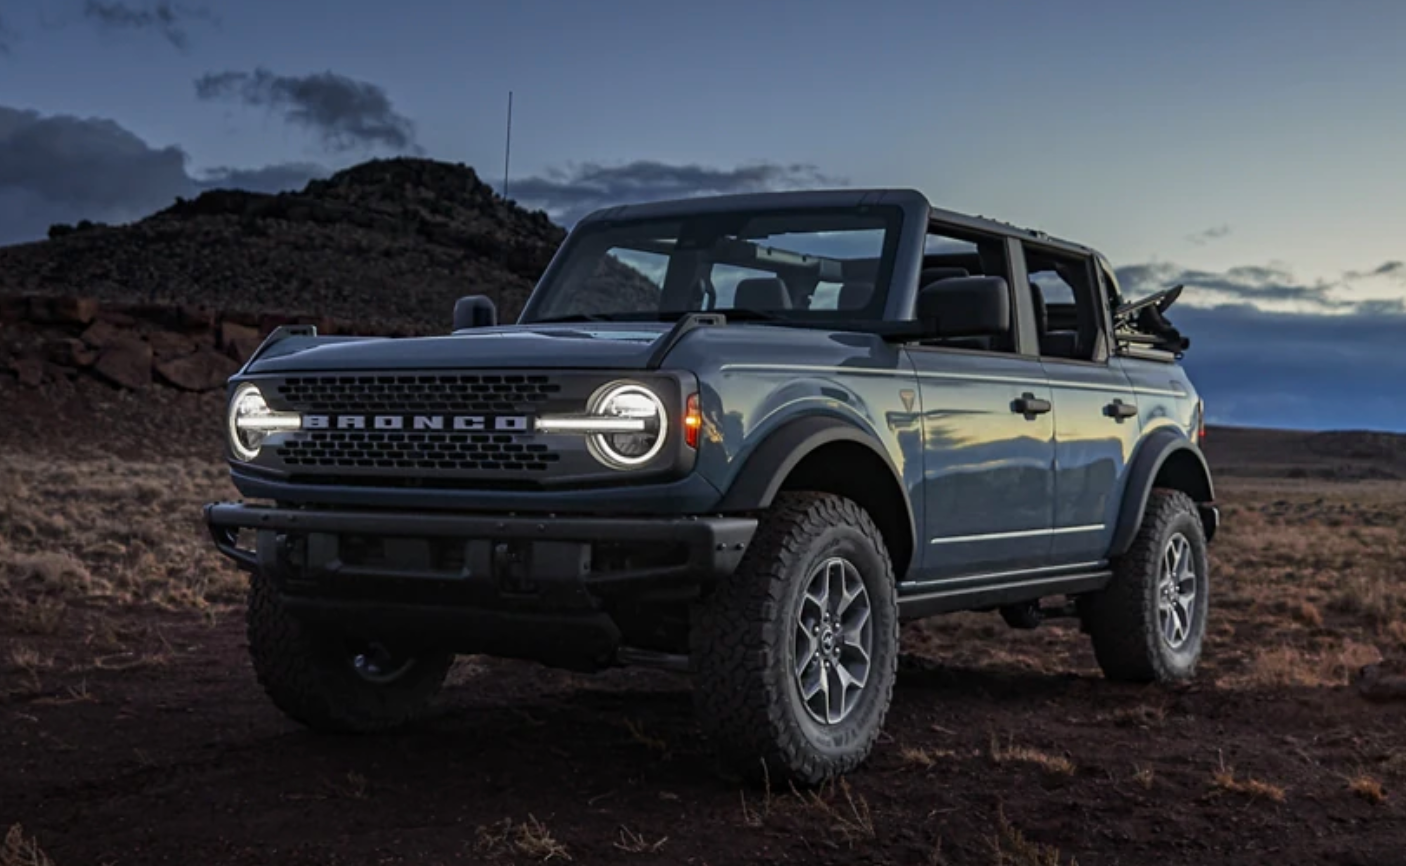 Ford's Midsize SUV 2021 Bronco Fails To Qualify For Coveted Safety Award